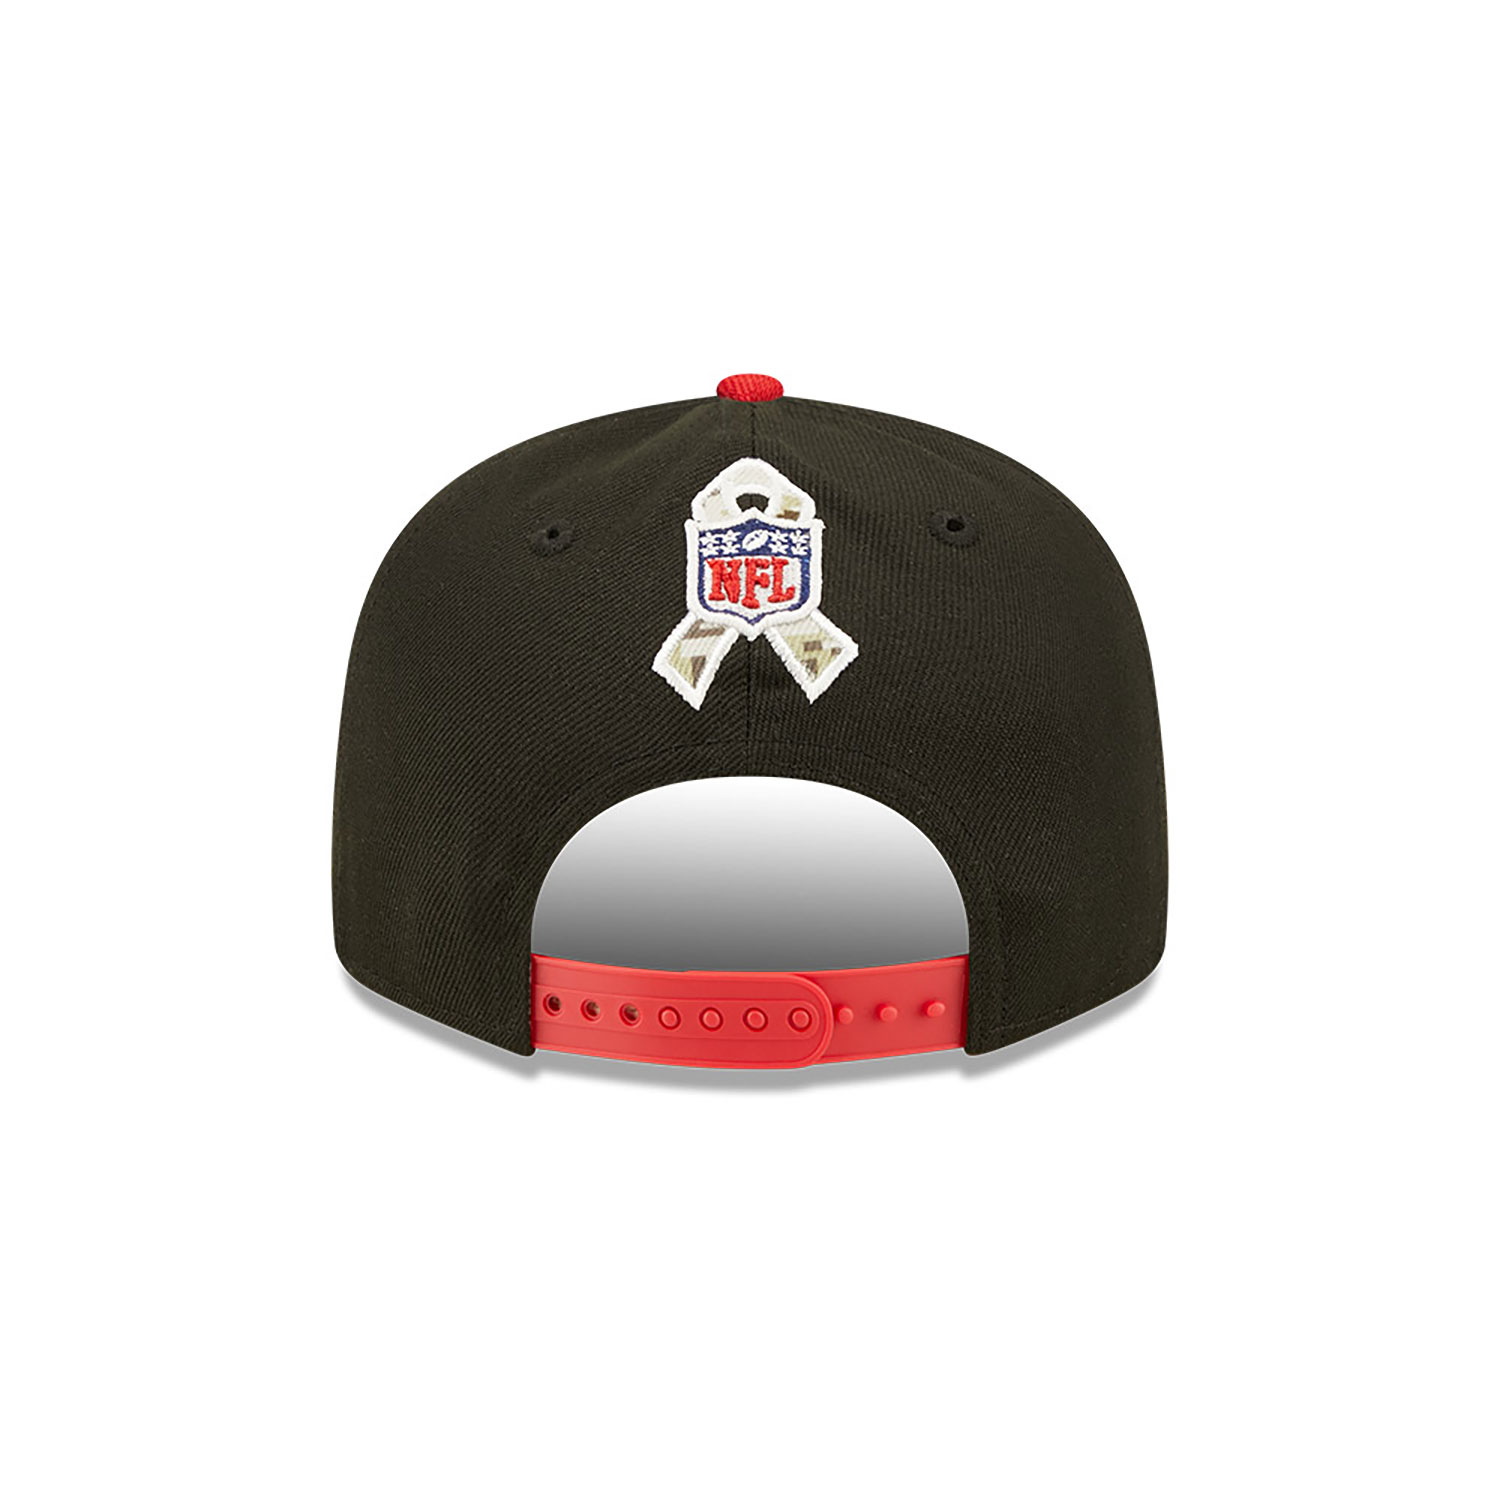 Tampa Bay Buccaneers NFL Salute to Service Black 9FIFTY Snapback Cap